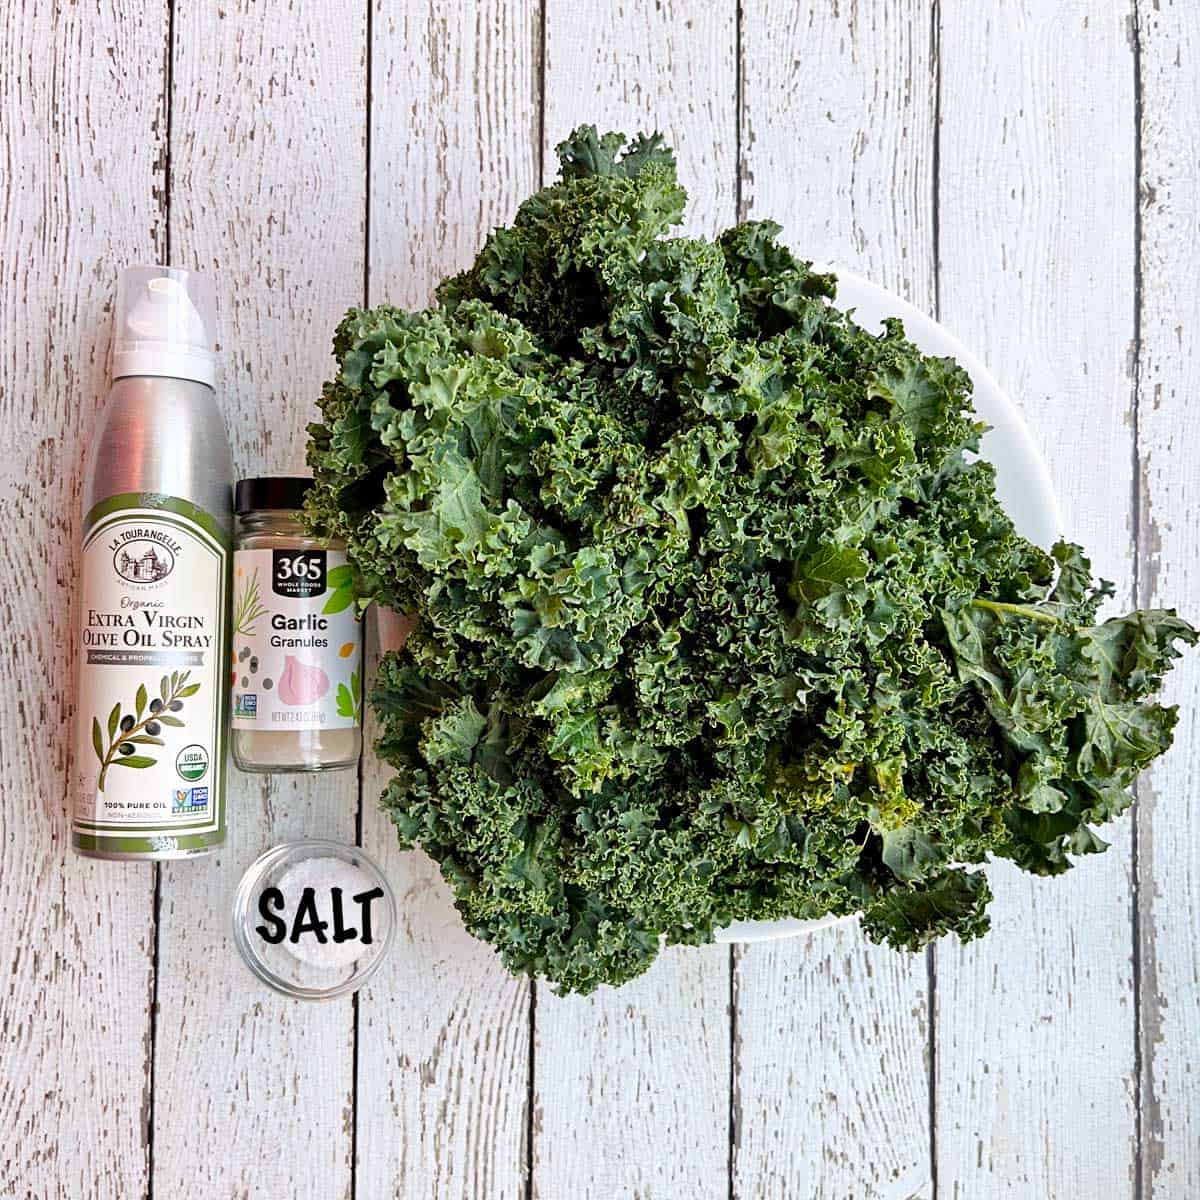 The ingredients needed to bake kale chips. 